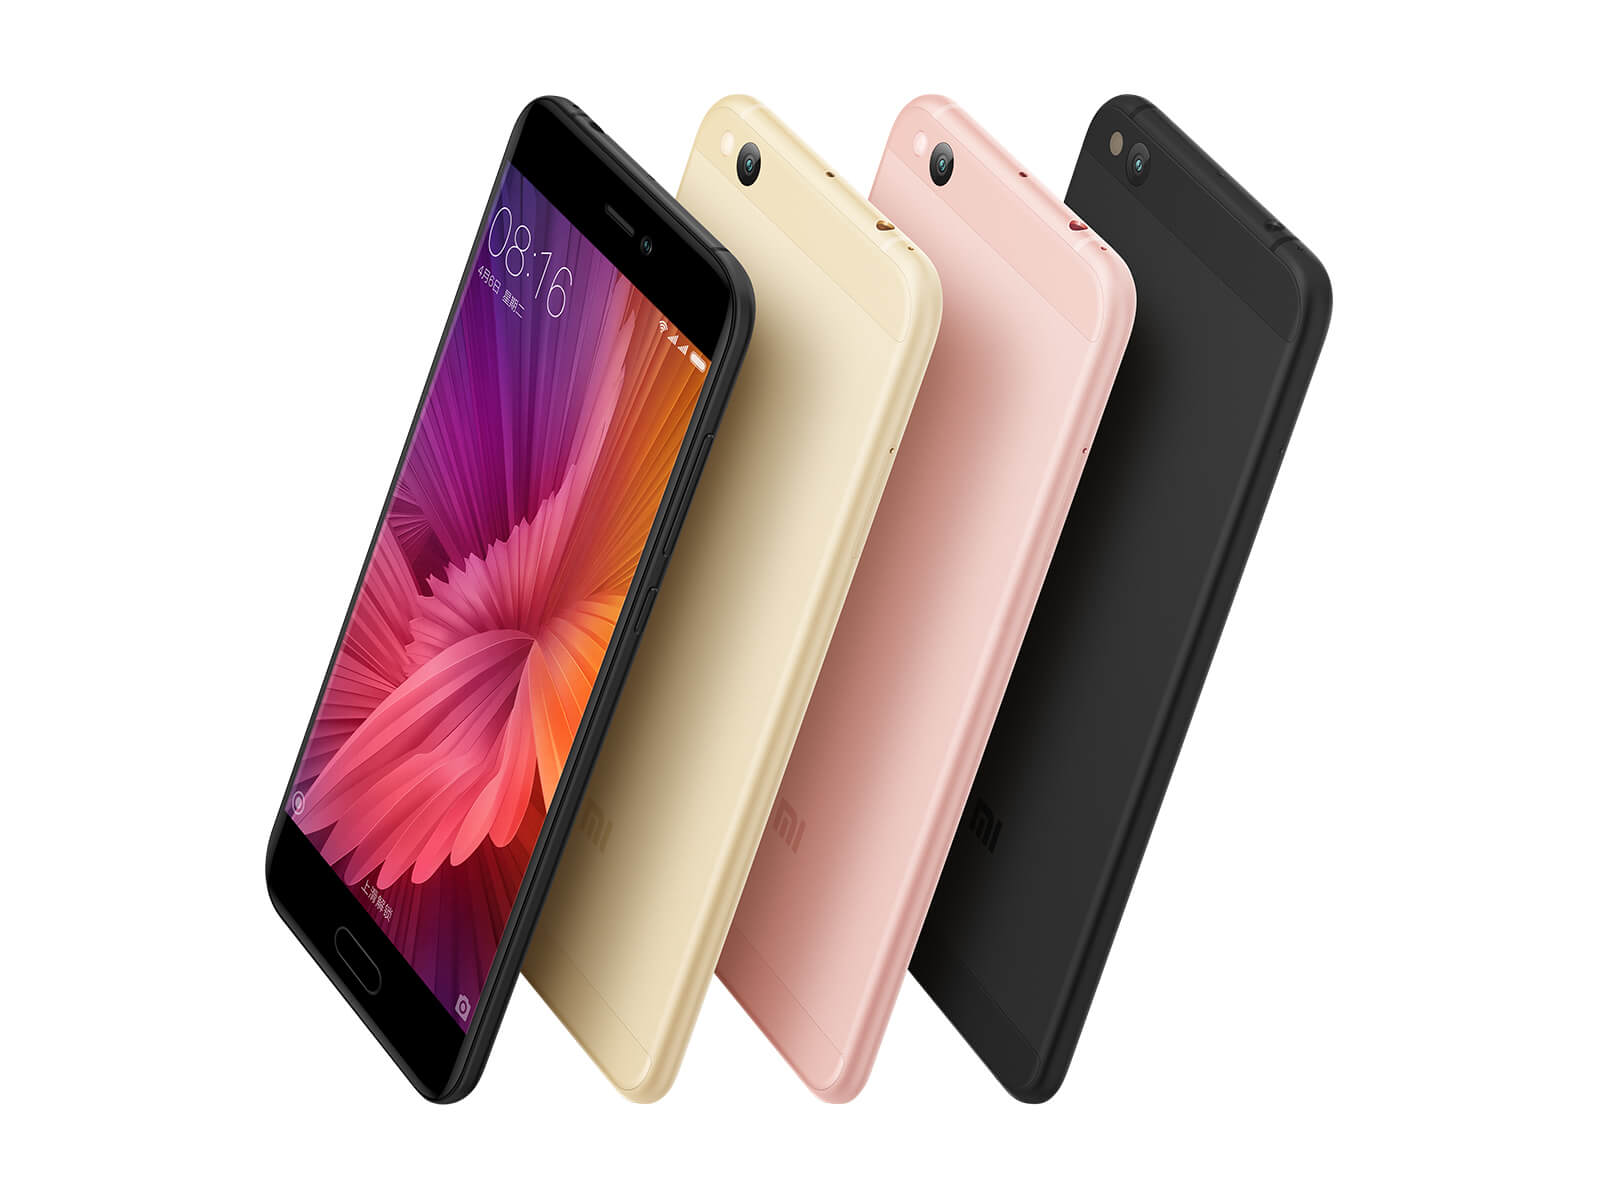 Xiaomi Mi 5c smartphone which is powered by the company's first Surge S1 chipset.